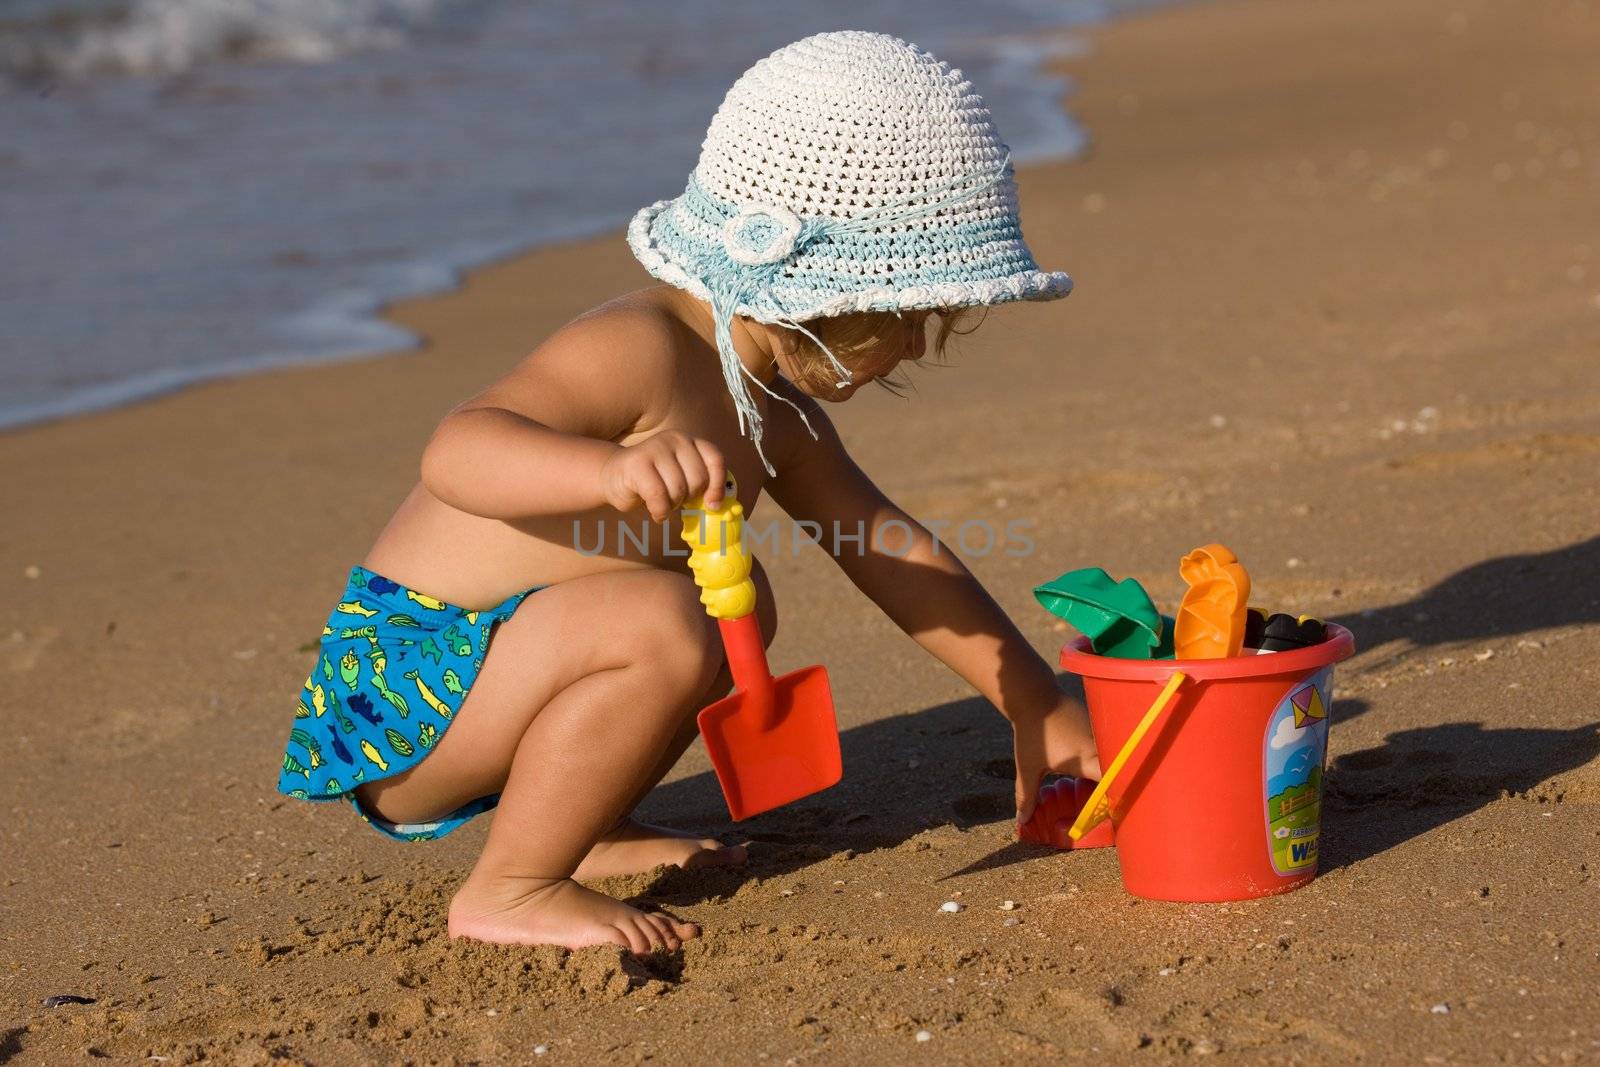 little girl in the bonnet plaing with sand, childhood